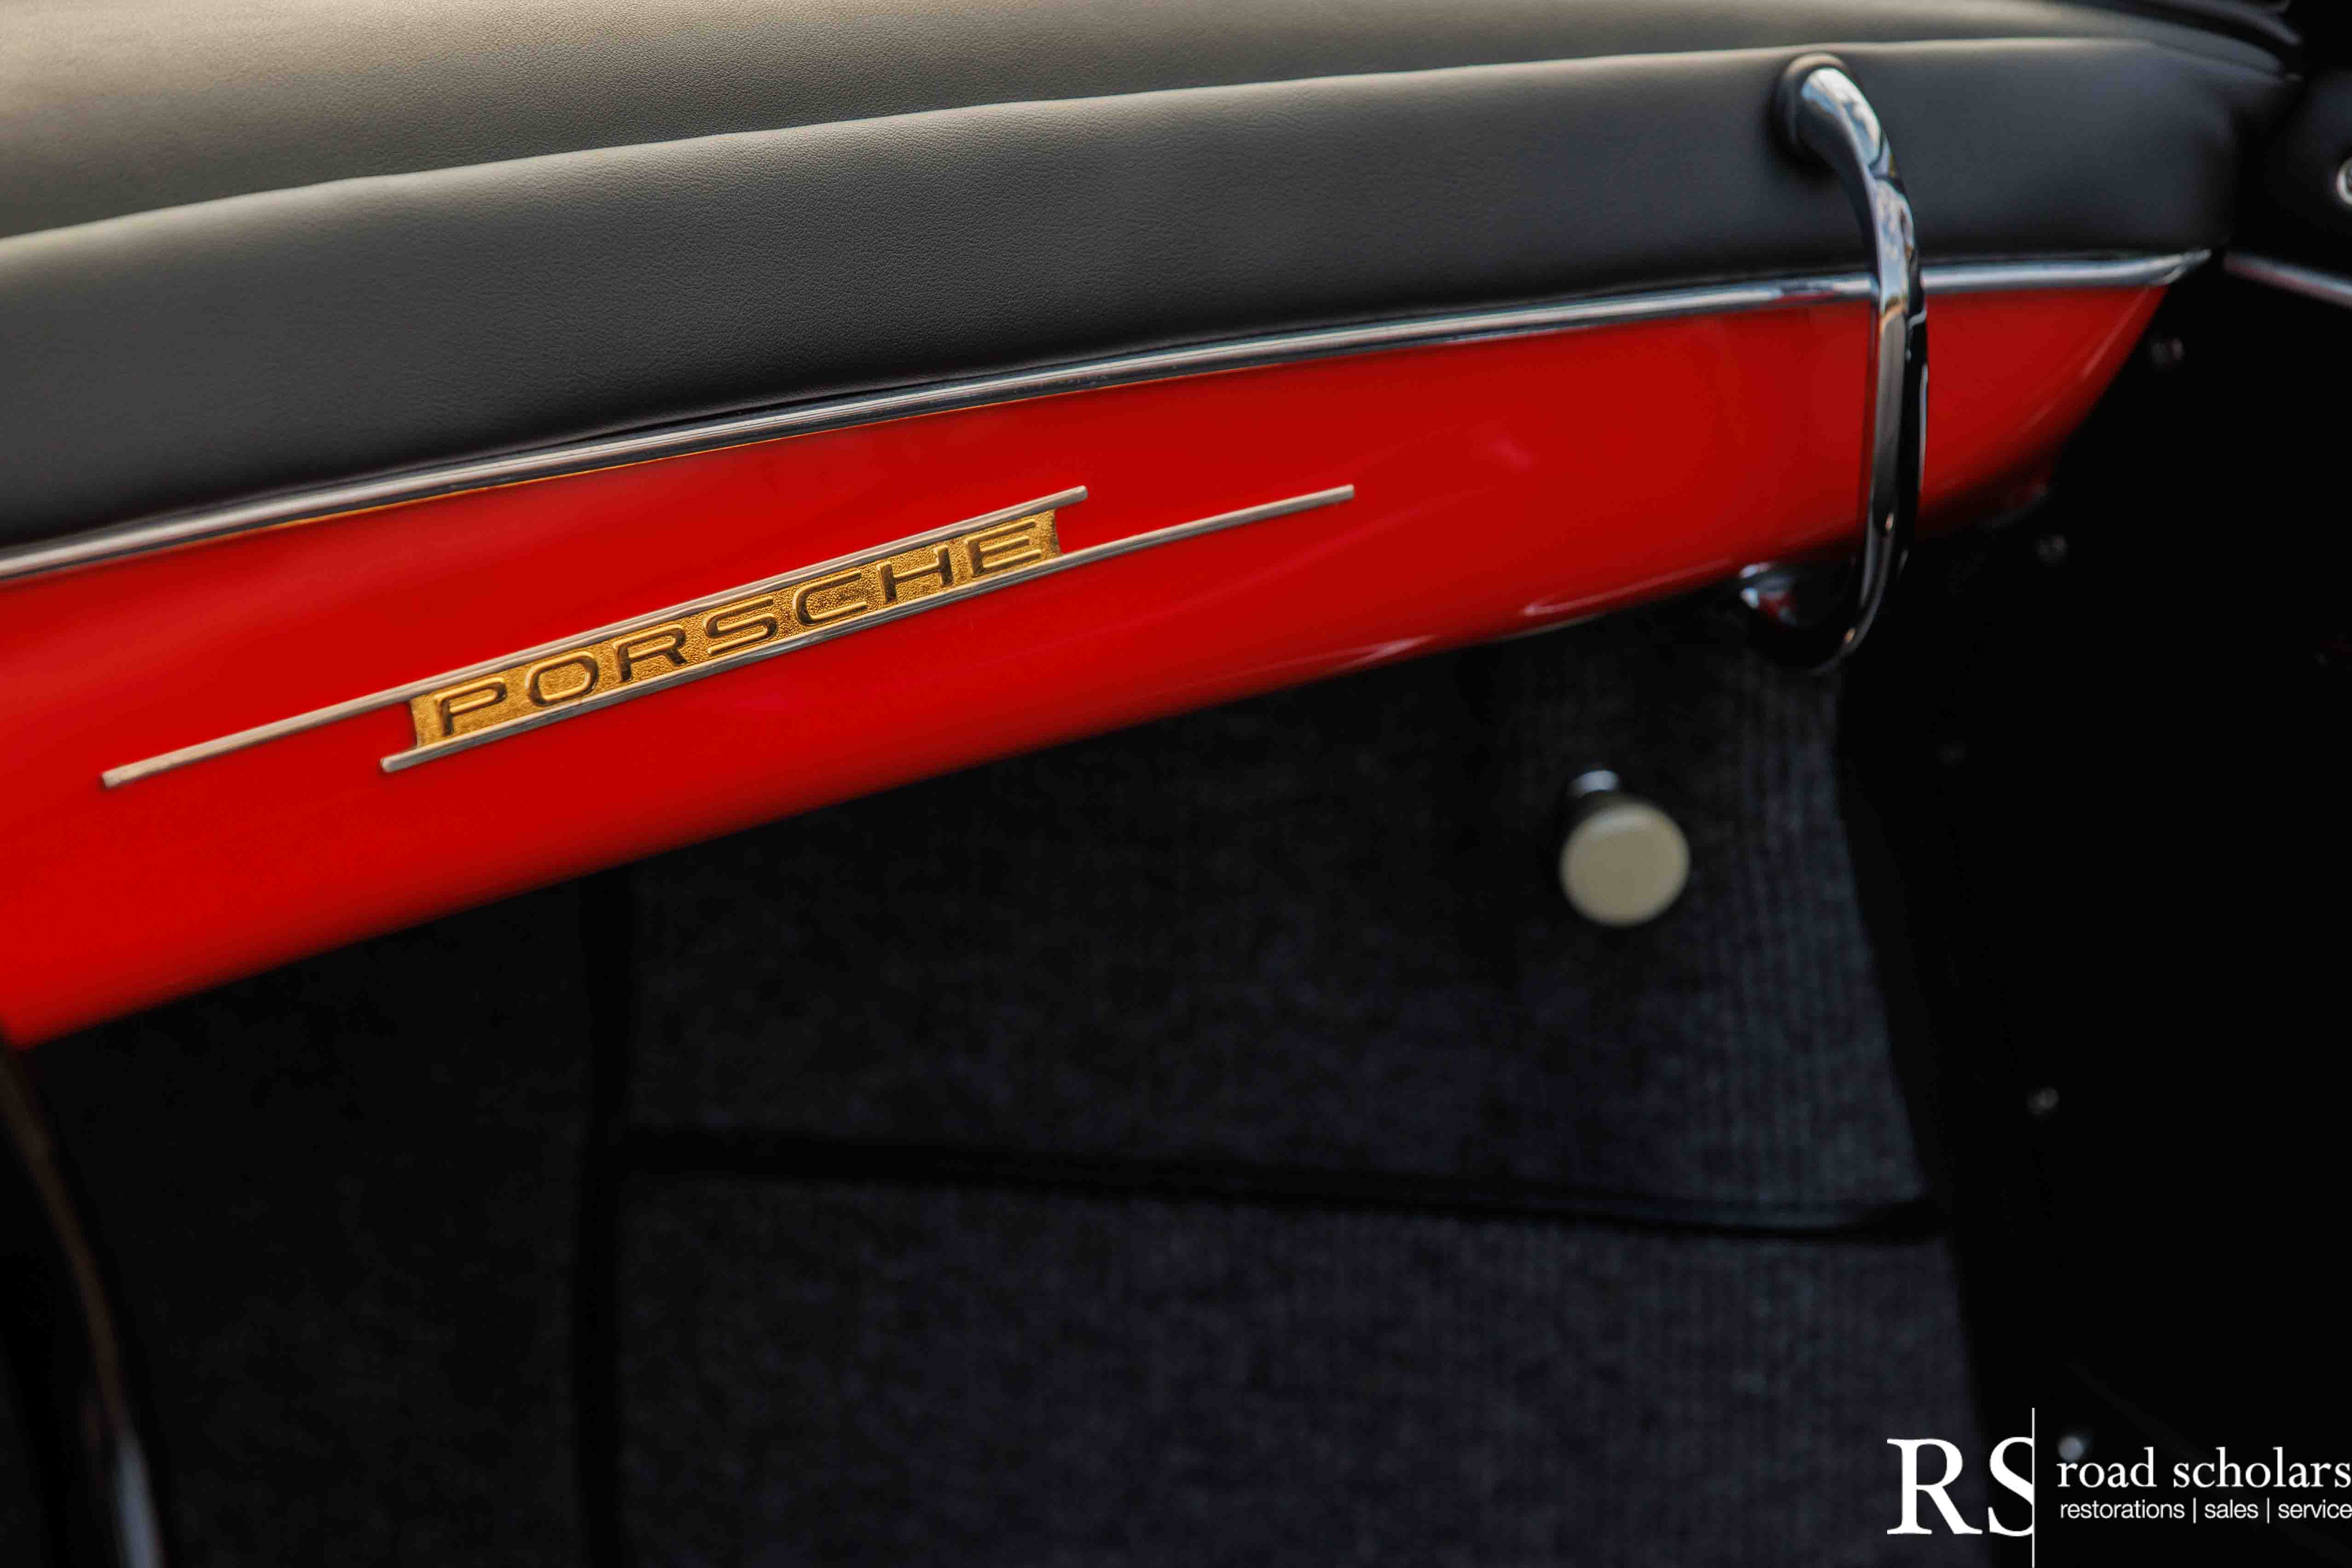 1961 Porsche 356B Super 90 (T5) Roadster chassis 89305 (watermarked)-45